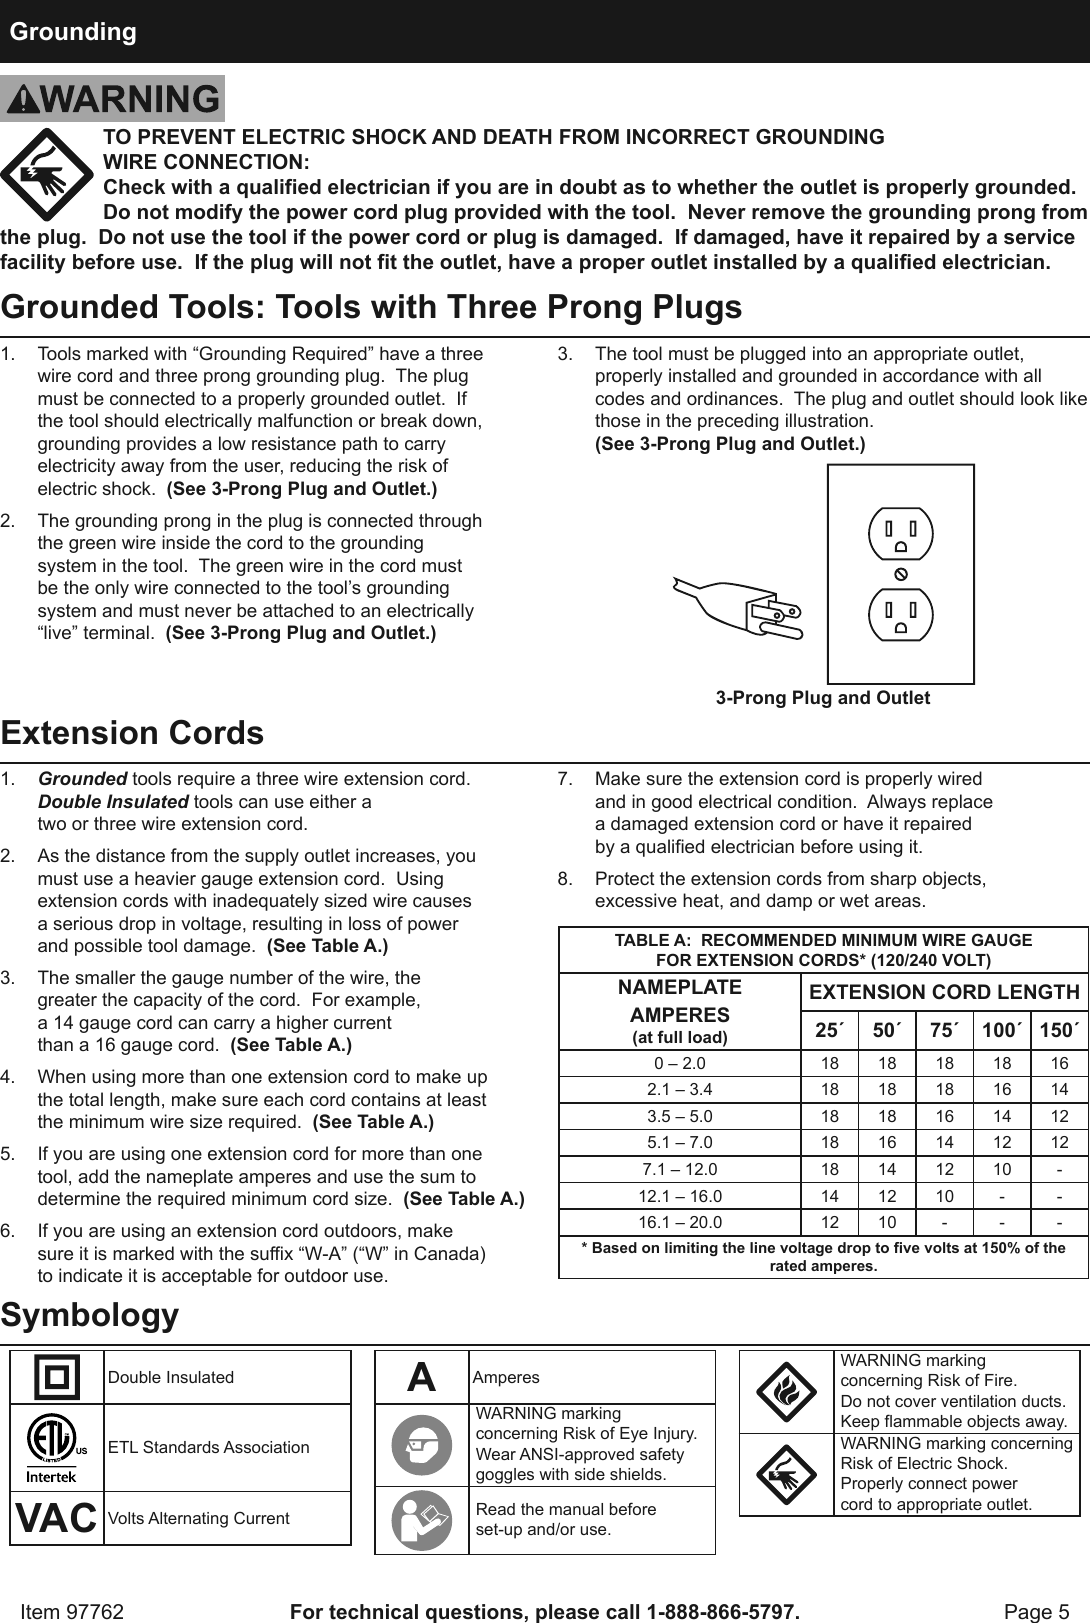 Page 5 of 8 - Harbor-Freight Harbor-Freight-8In-Portable-Ventilator-Product-Manual-  Harbor-freight-8in-portable-ventilator-product-manual